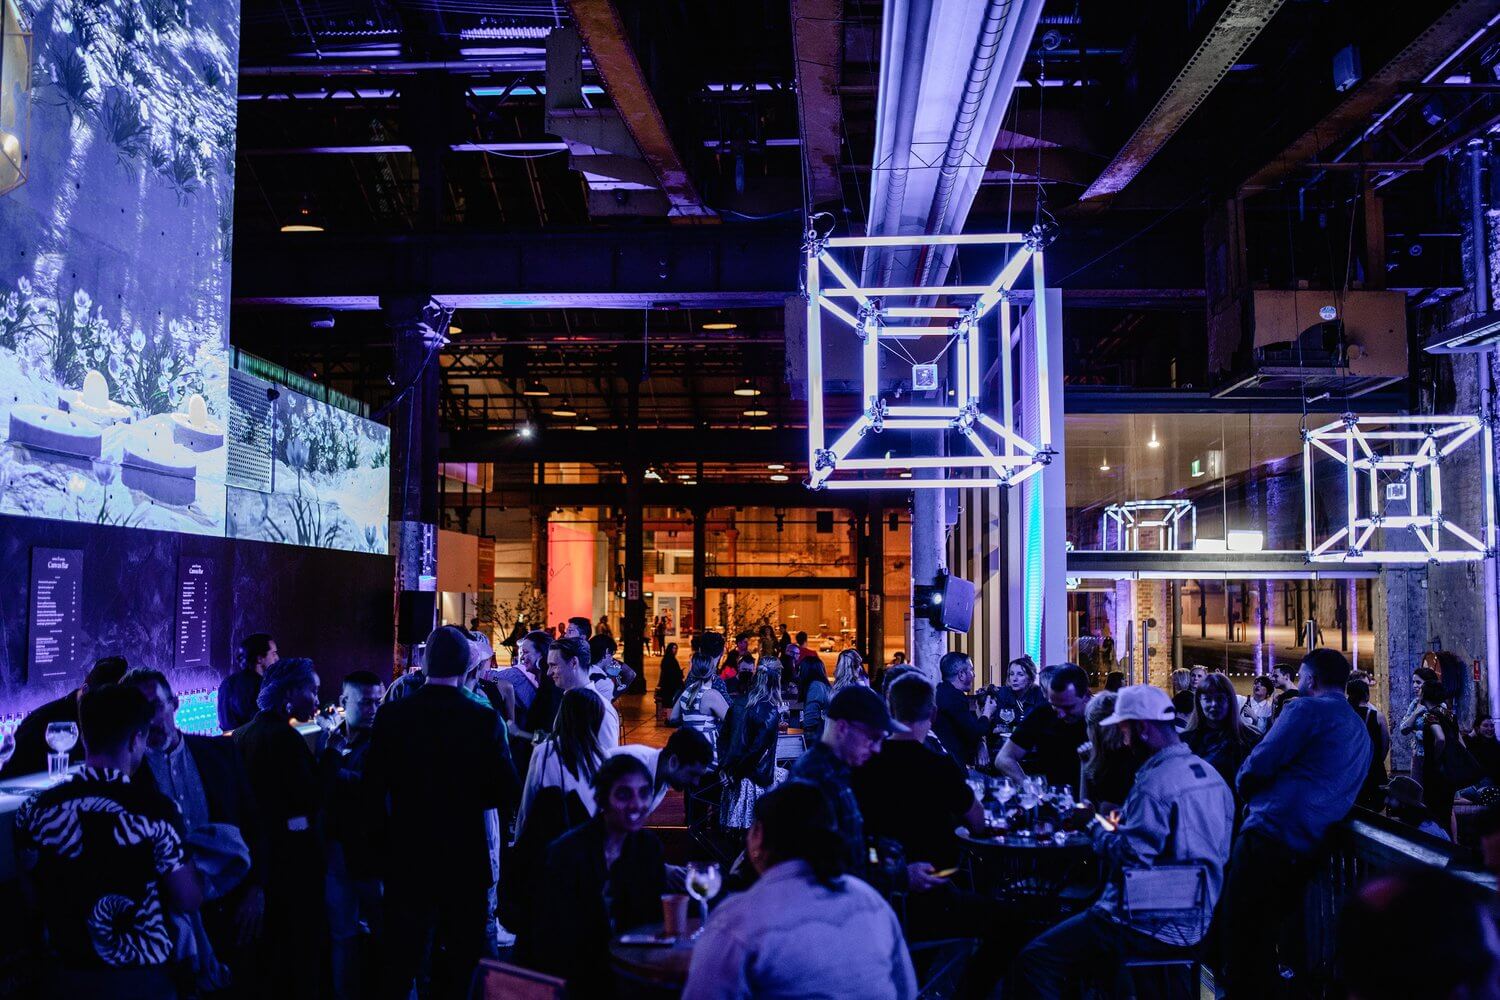 A large group of people in a dimly lit warehouse looking bar with large neon cubical installations and screens around the room.